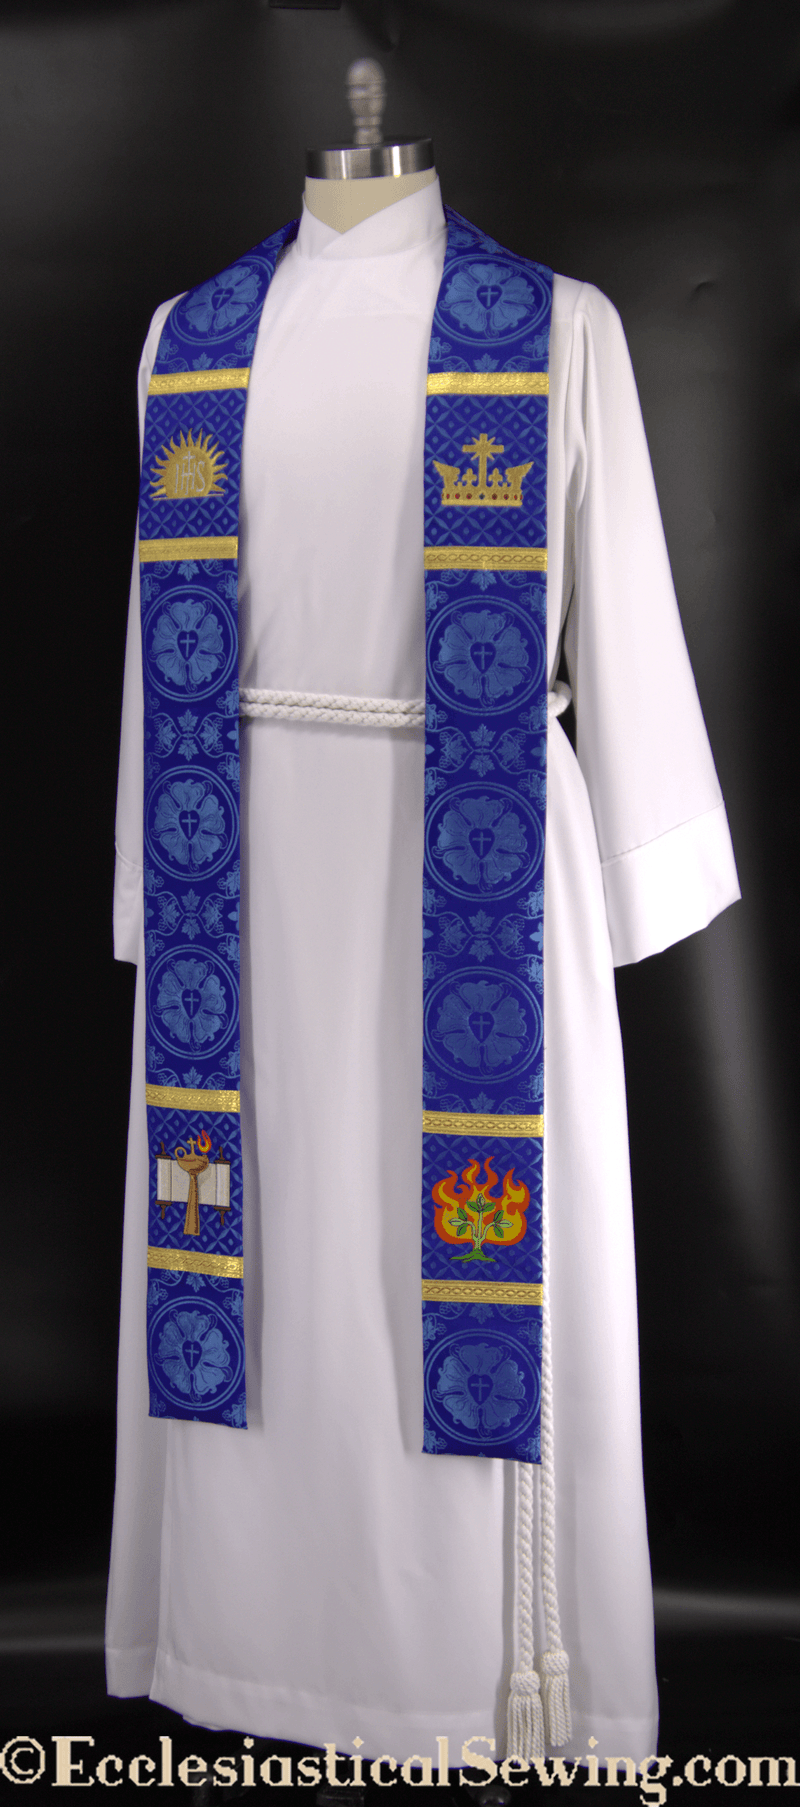 files/o-wisdom-advent-stole-or-violet-blue-pastor-priest-advent-stole-ecclesiastical-sewing-2-31790323237120.png